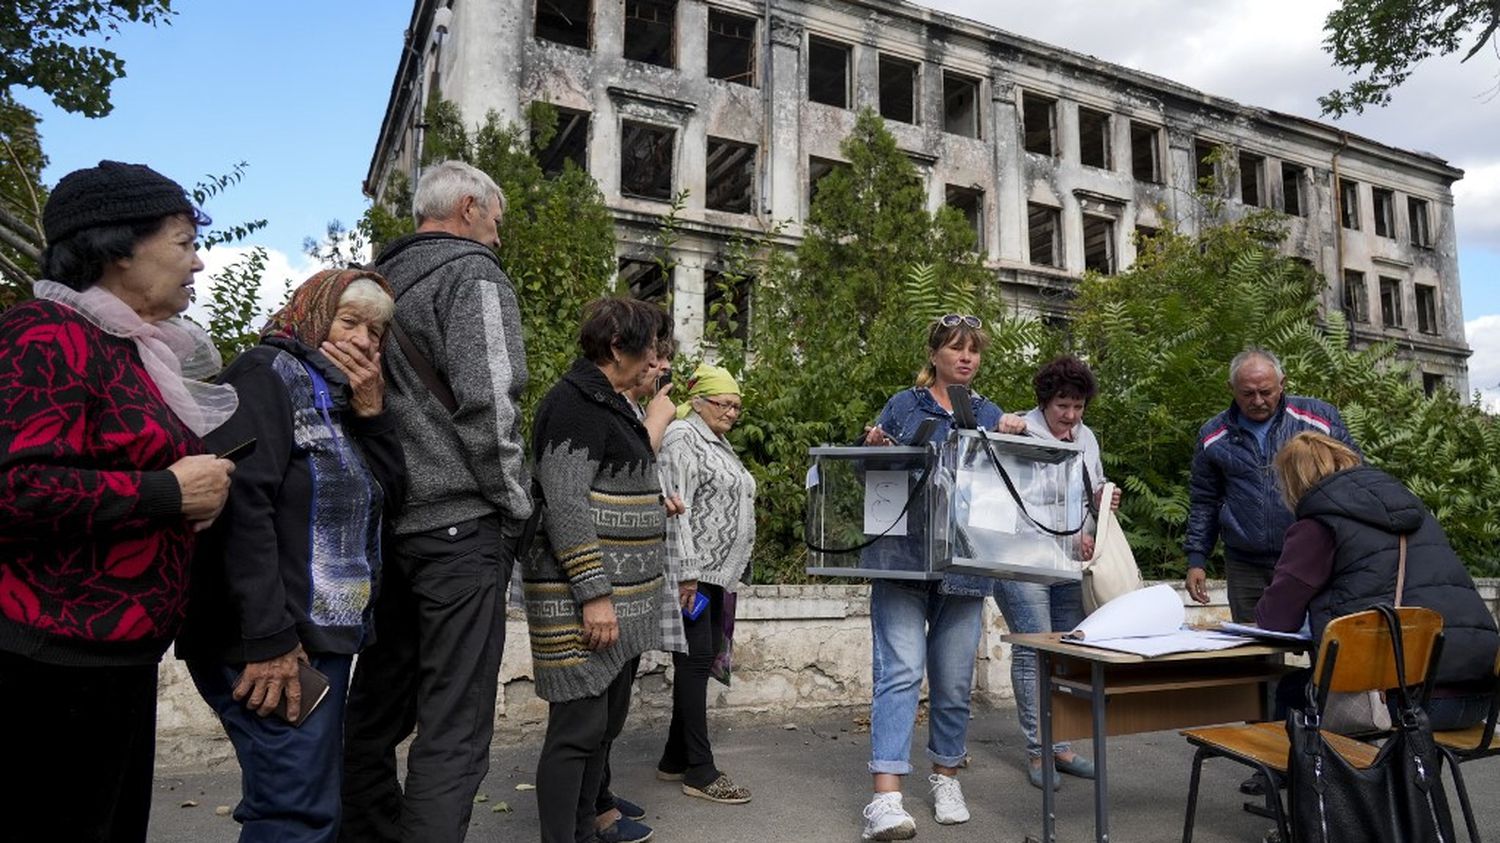 War in Ukraine: what process in Russia after the annexation referendums?
